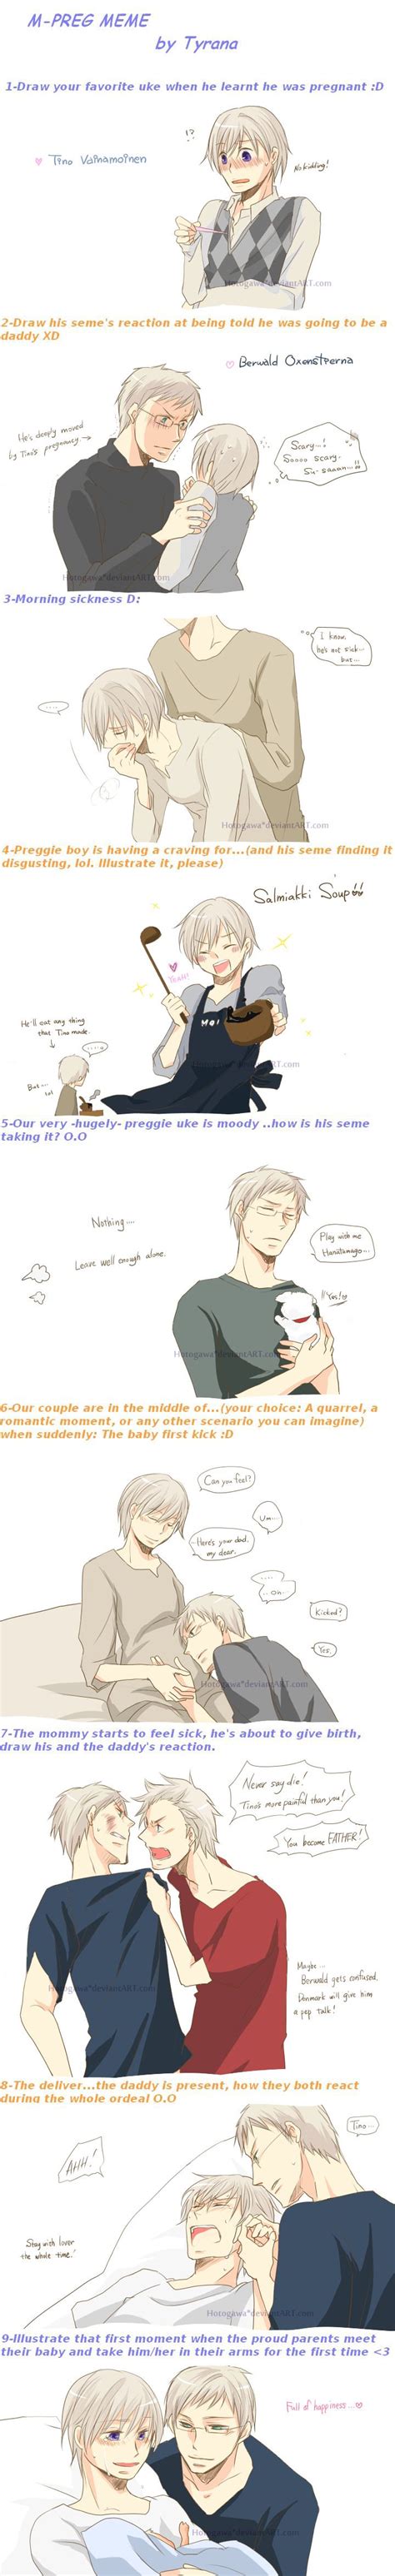 Nordic Countries Pregnancy And Birth In Axis Powers Hetalia